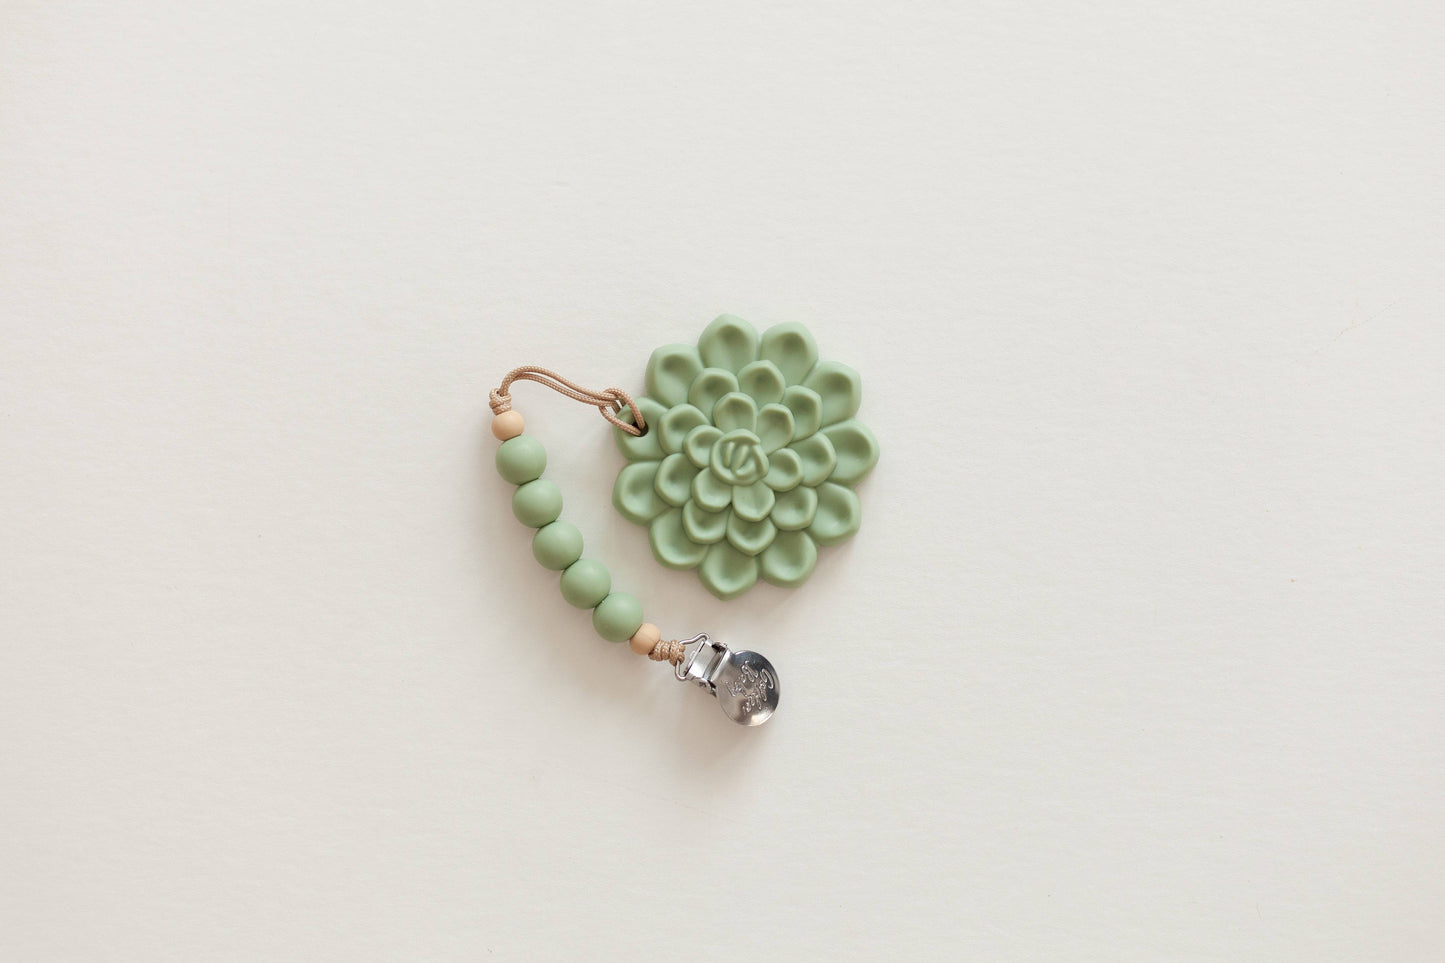 Succulent Teether Set: Teether and Clip Set